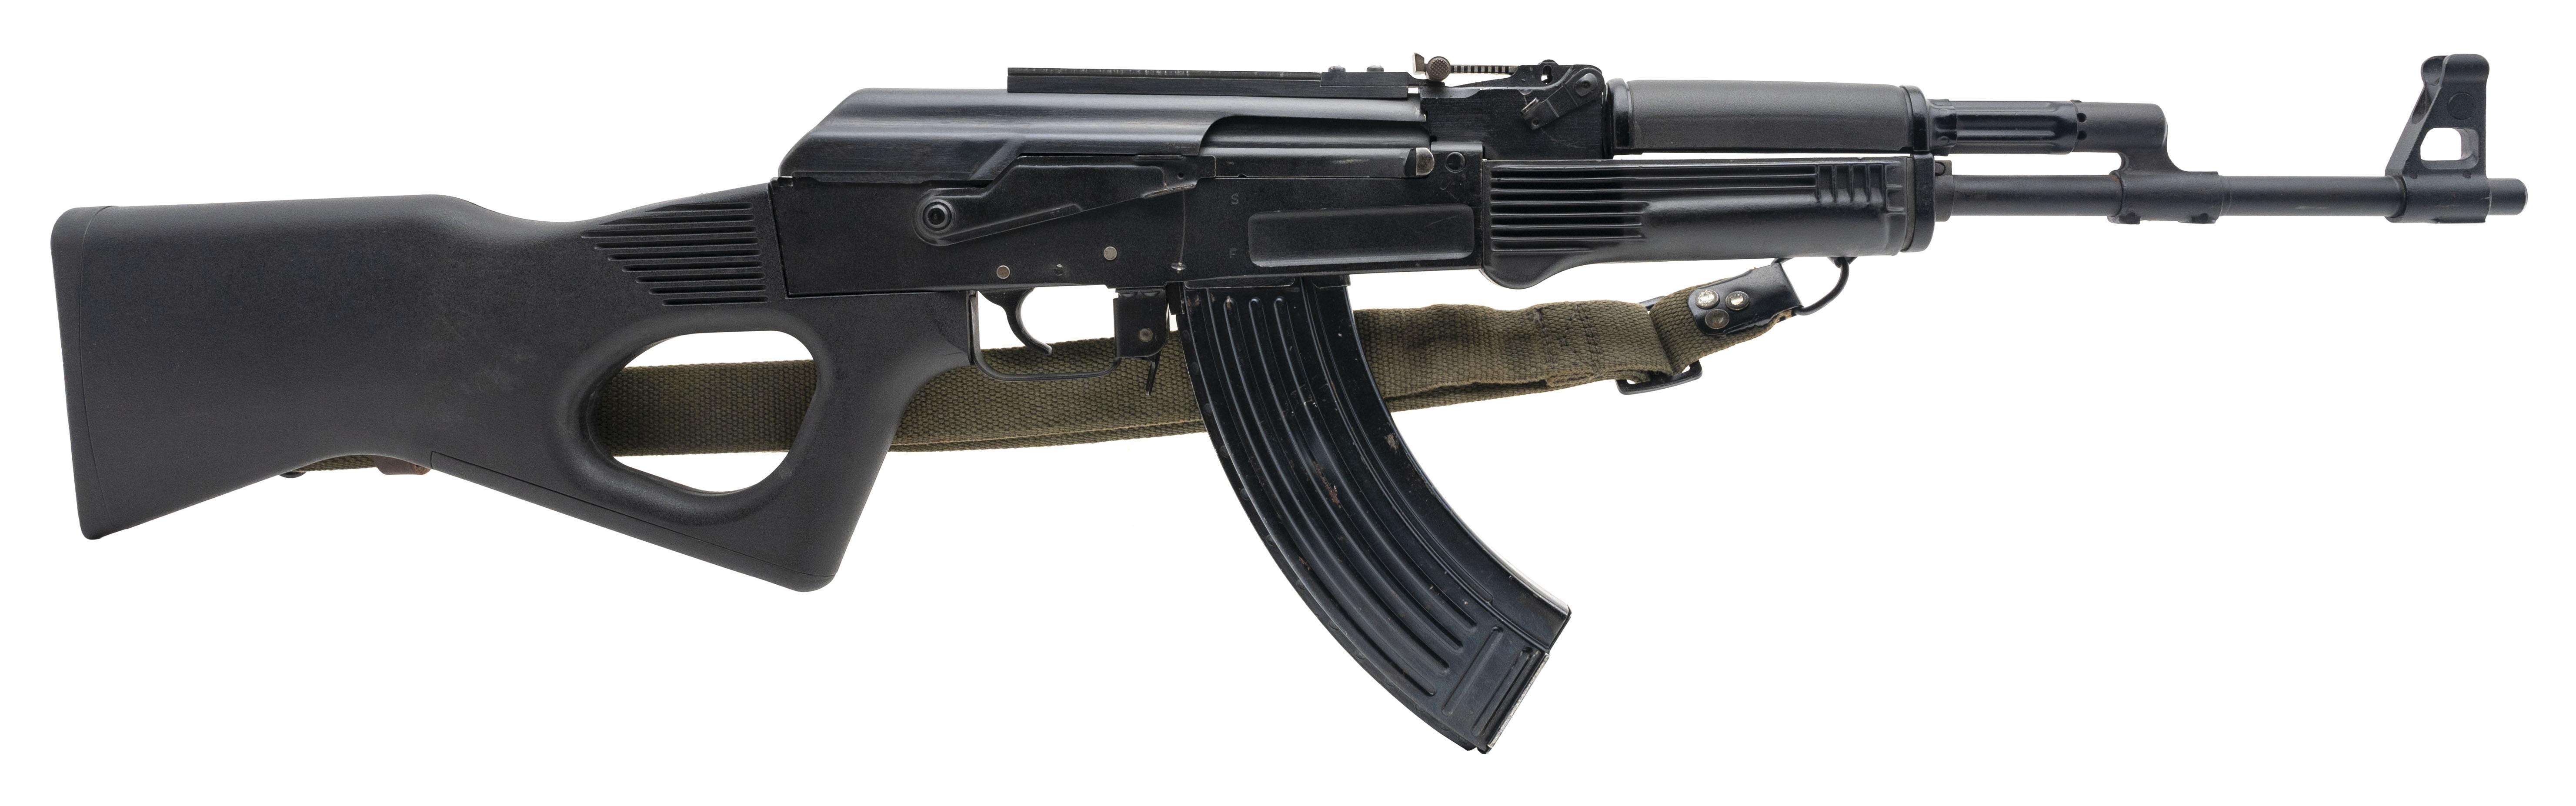 Arsenal SLR-95 Rifle 7.62x39mm (R42118) Consignment